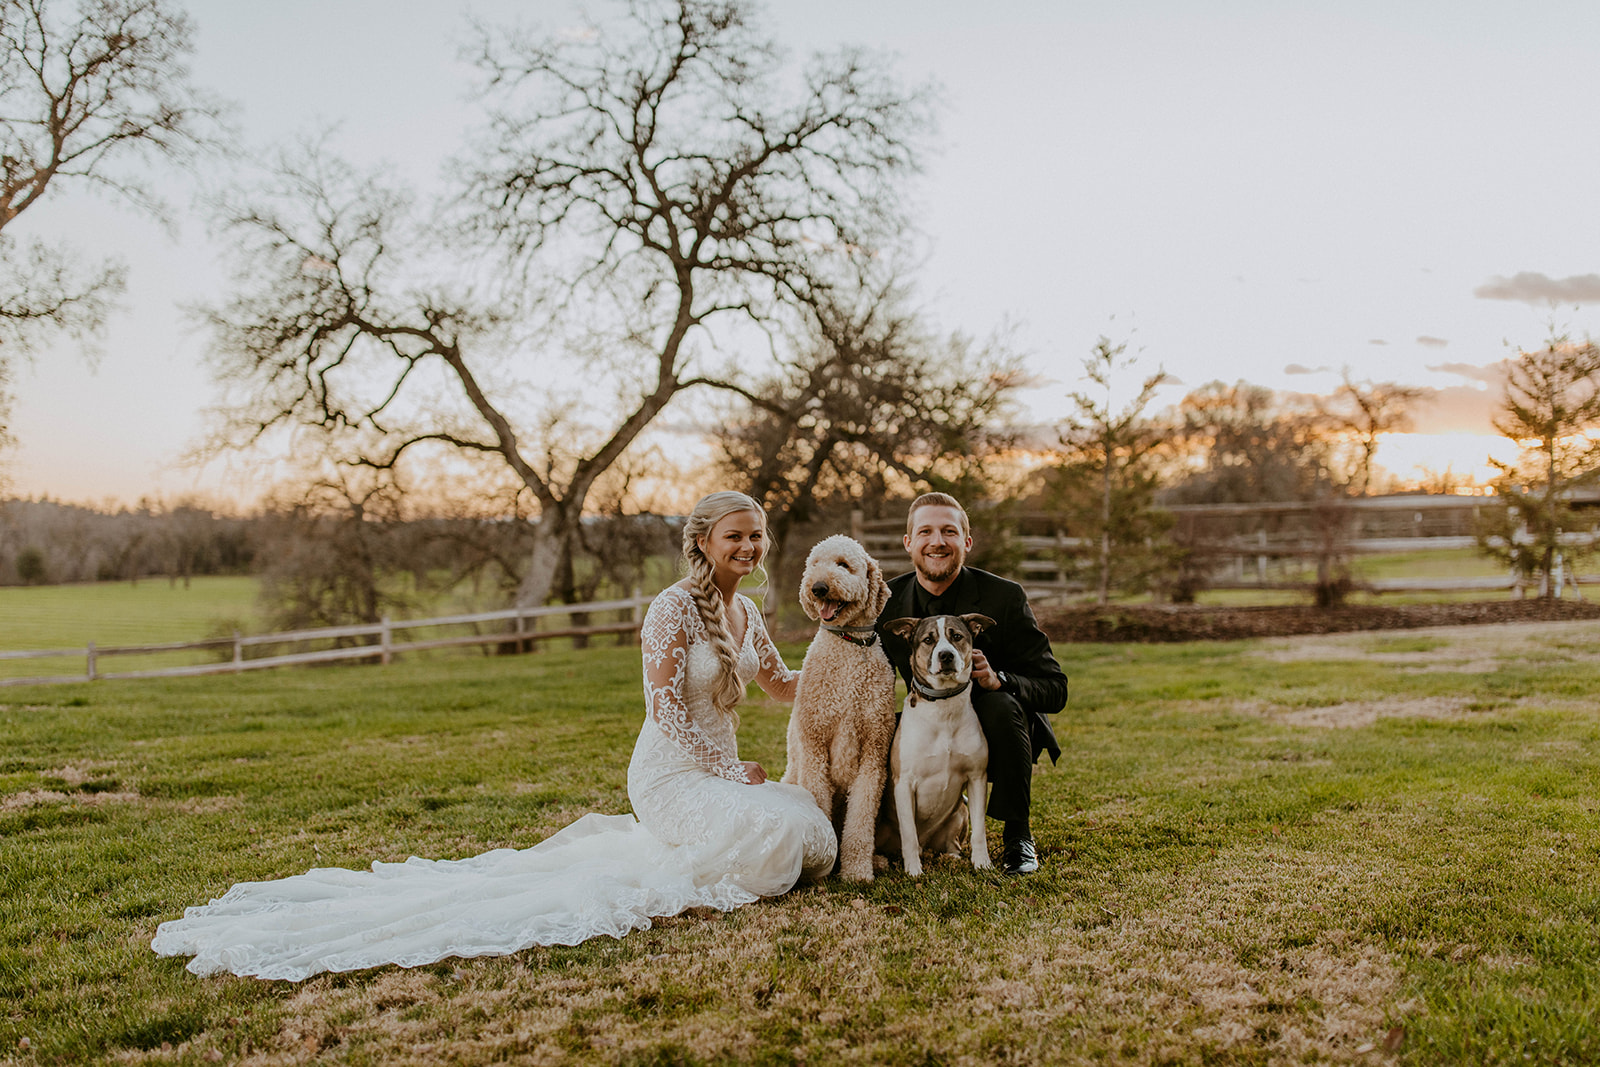 a couple poses with their dogs for a photo on their wedding day in bride and groom attire
